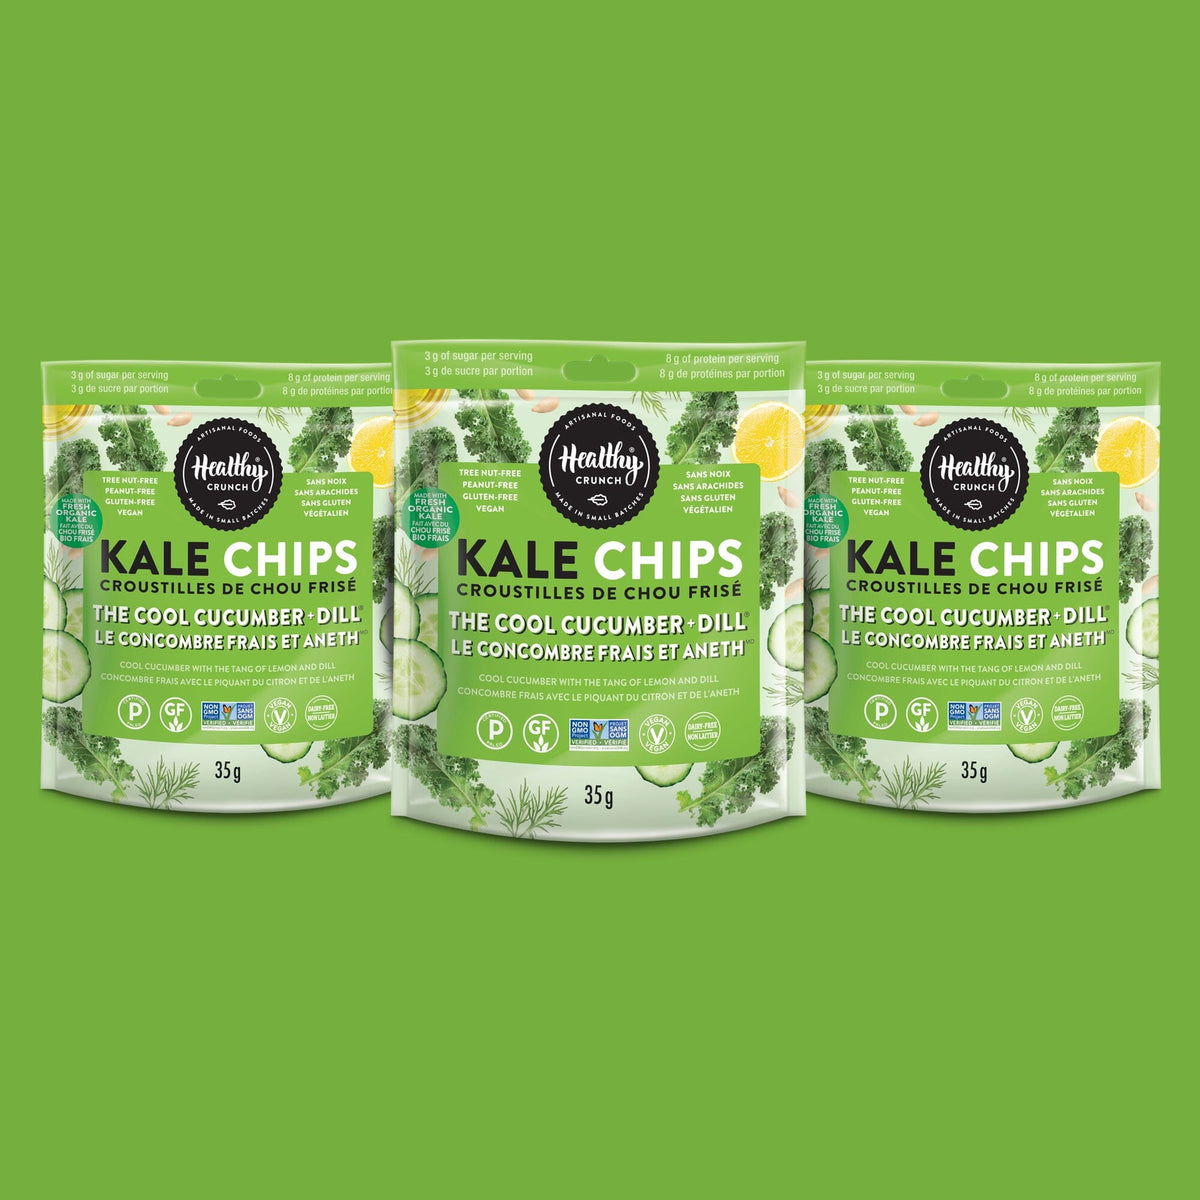 The Cool Cucumber + Dill Kale Chips